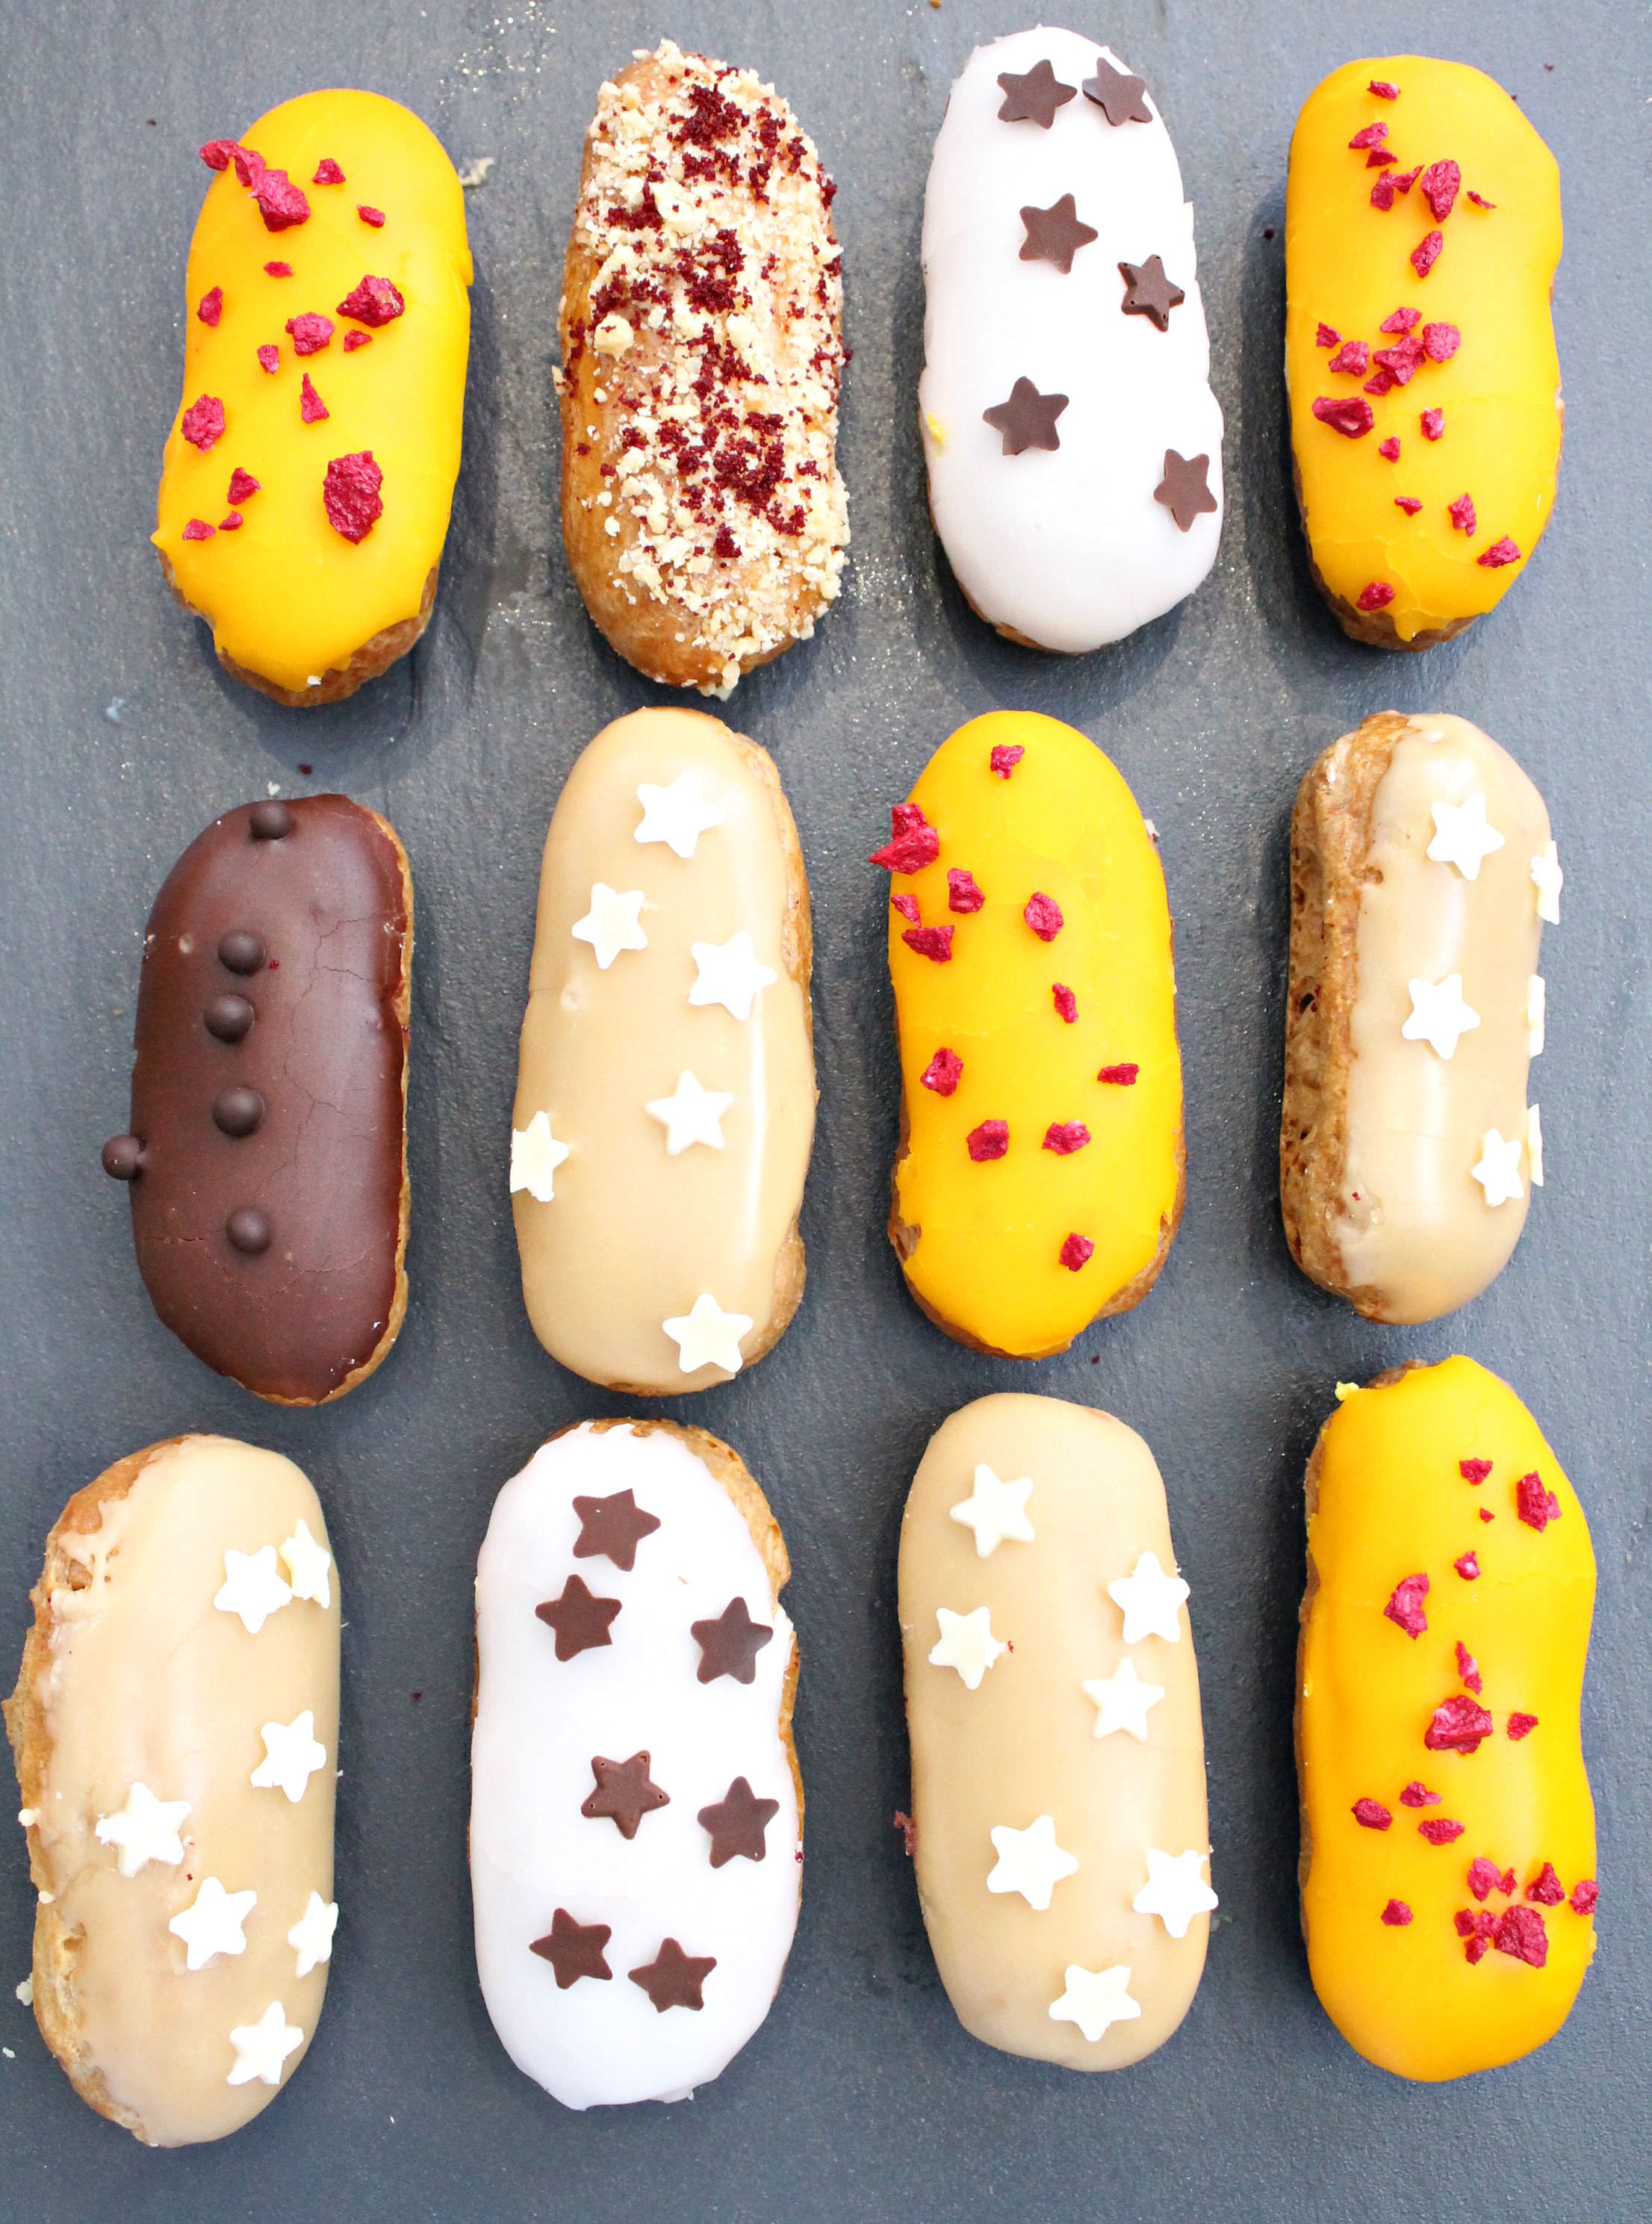 Eclairs-Le-Meridien-hotel-photo-by-Little-Big-Bell